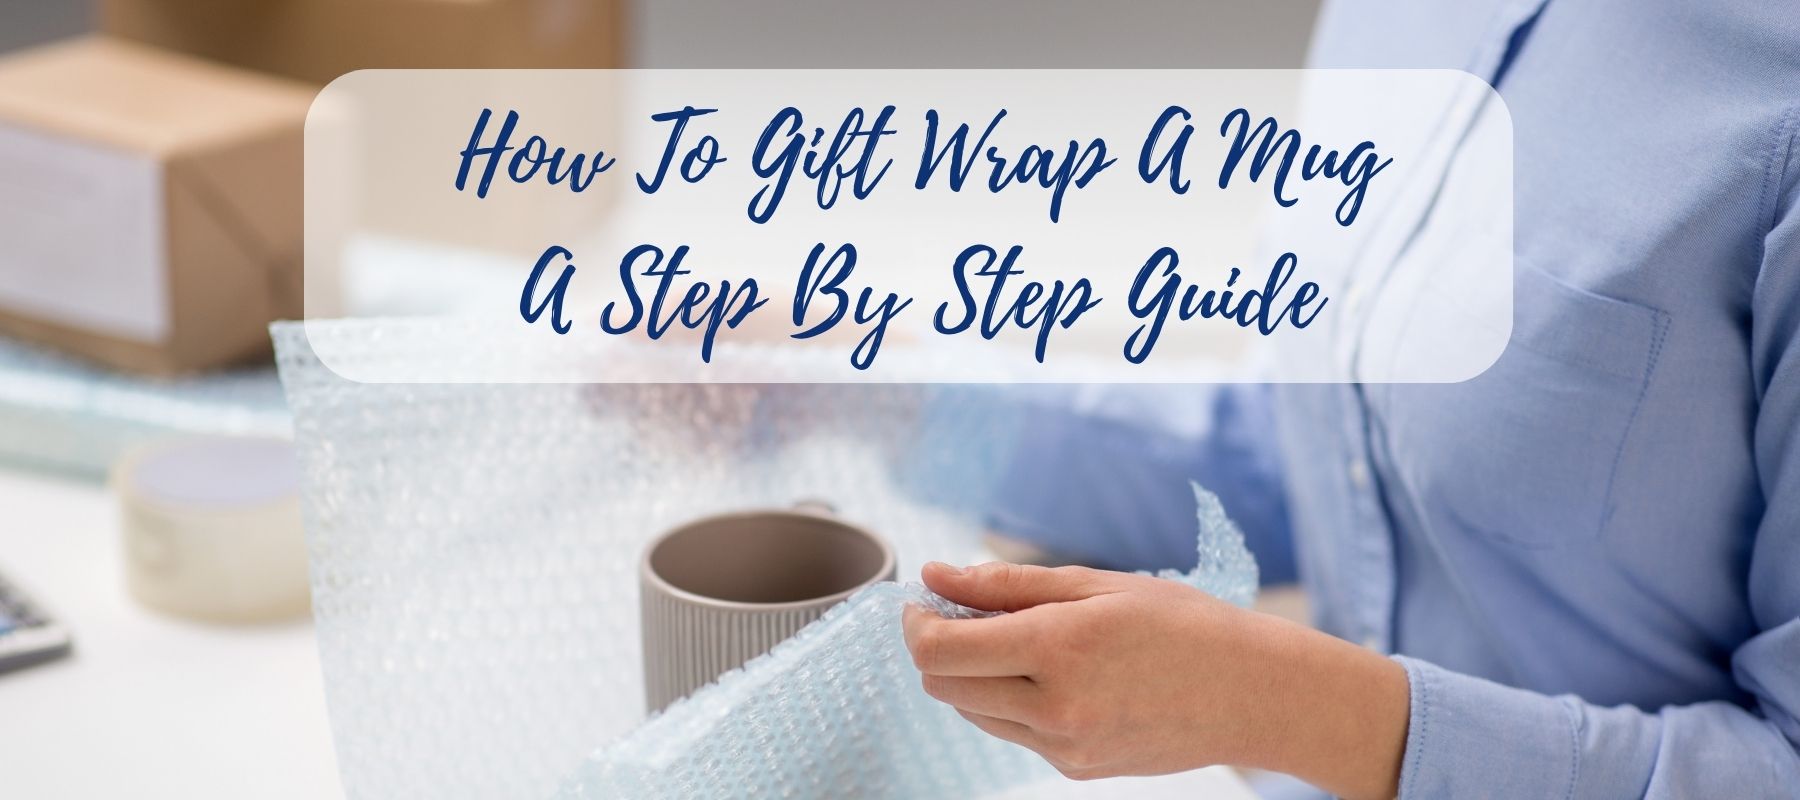 How-to-wrap-coffee-mugs-for-gifts